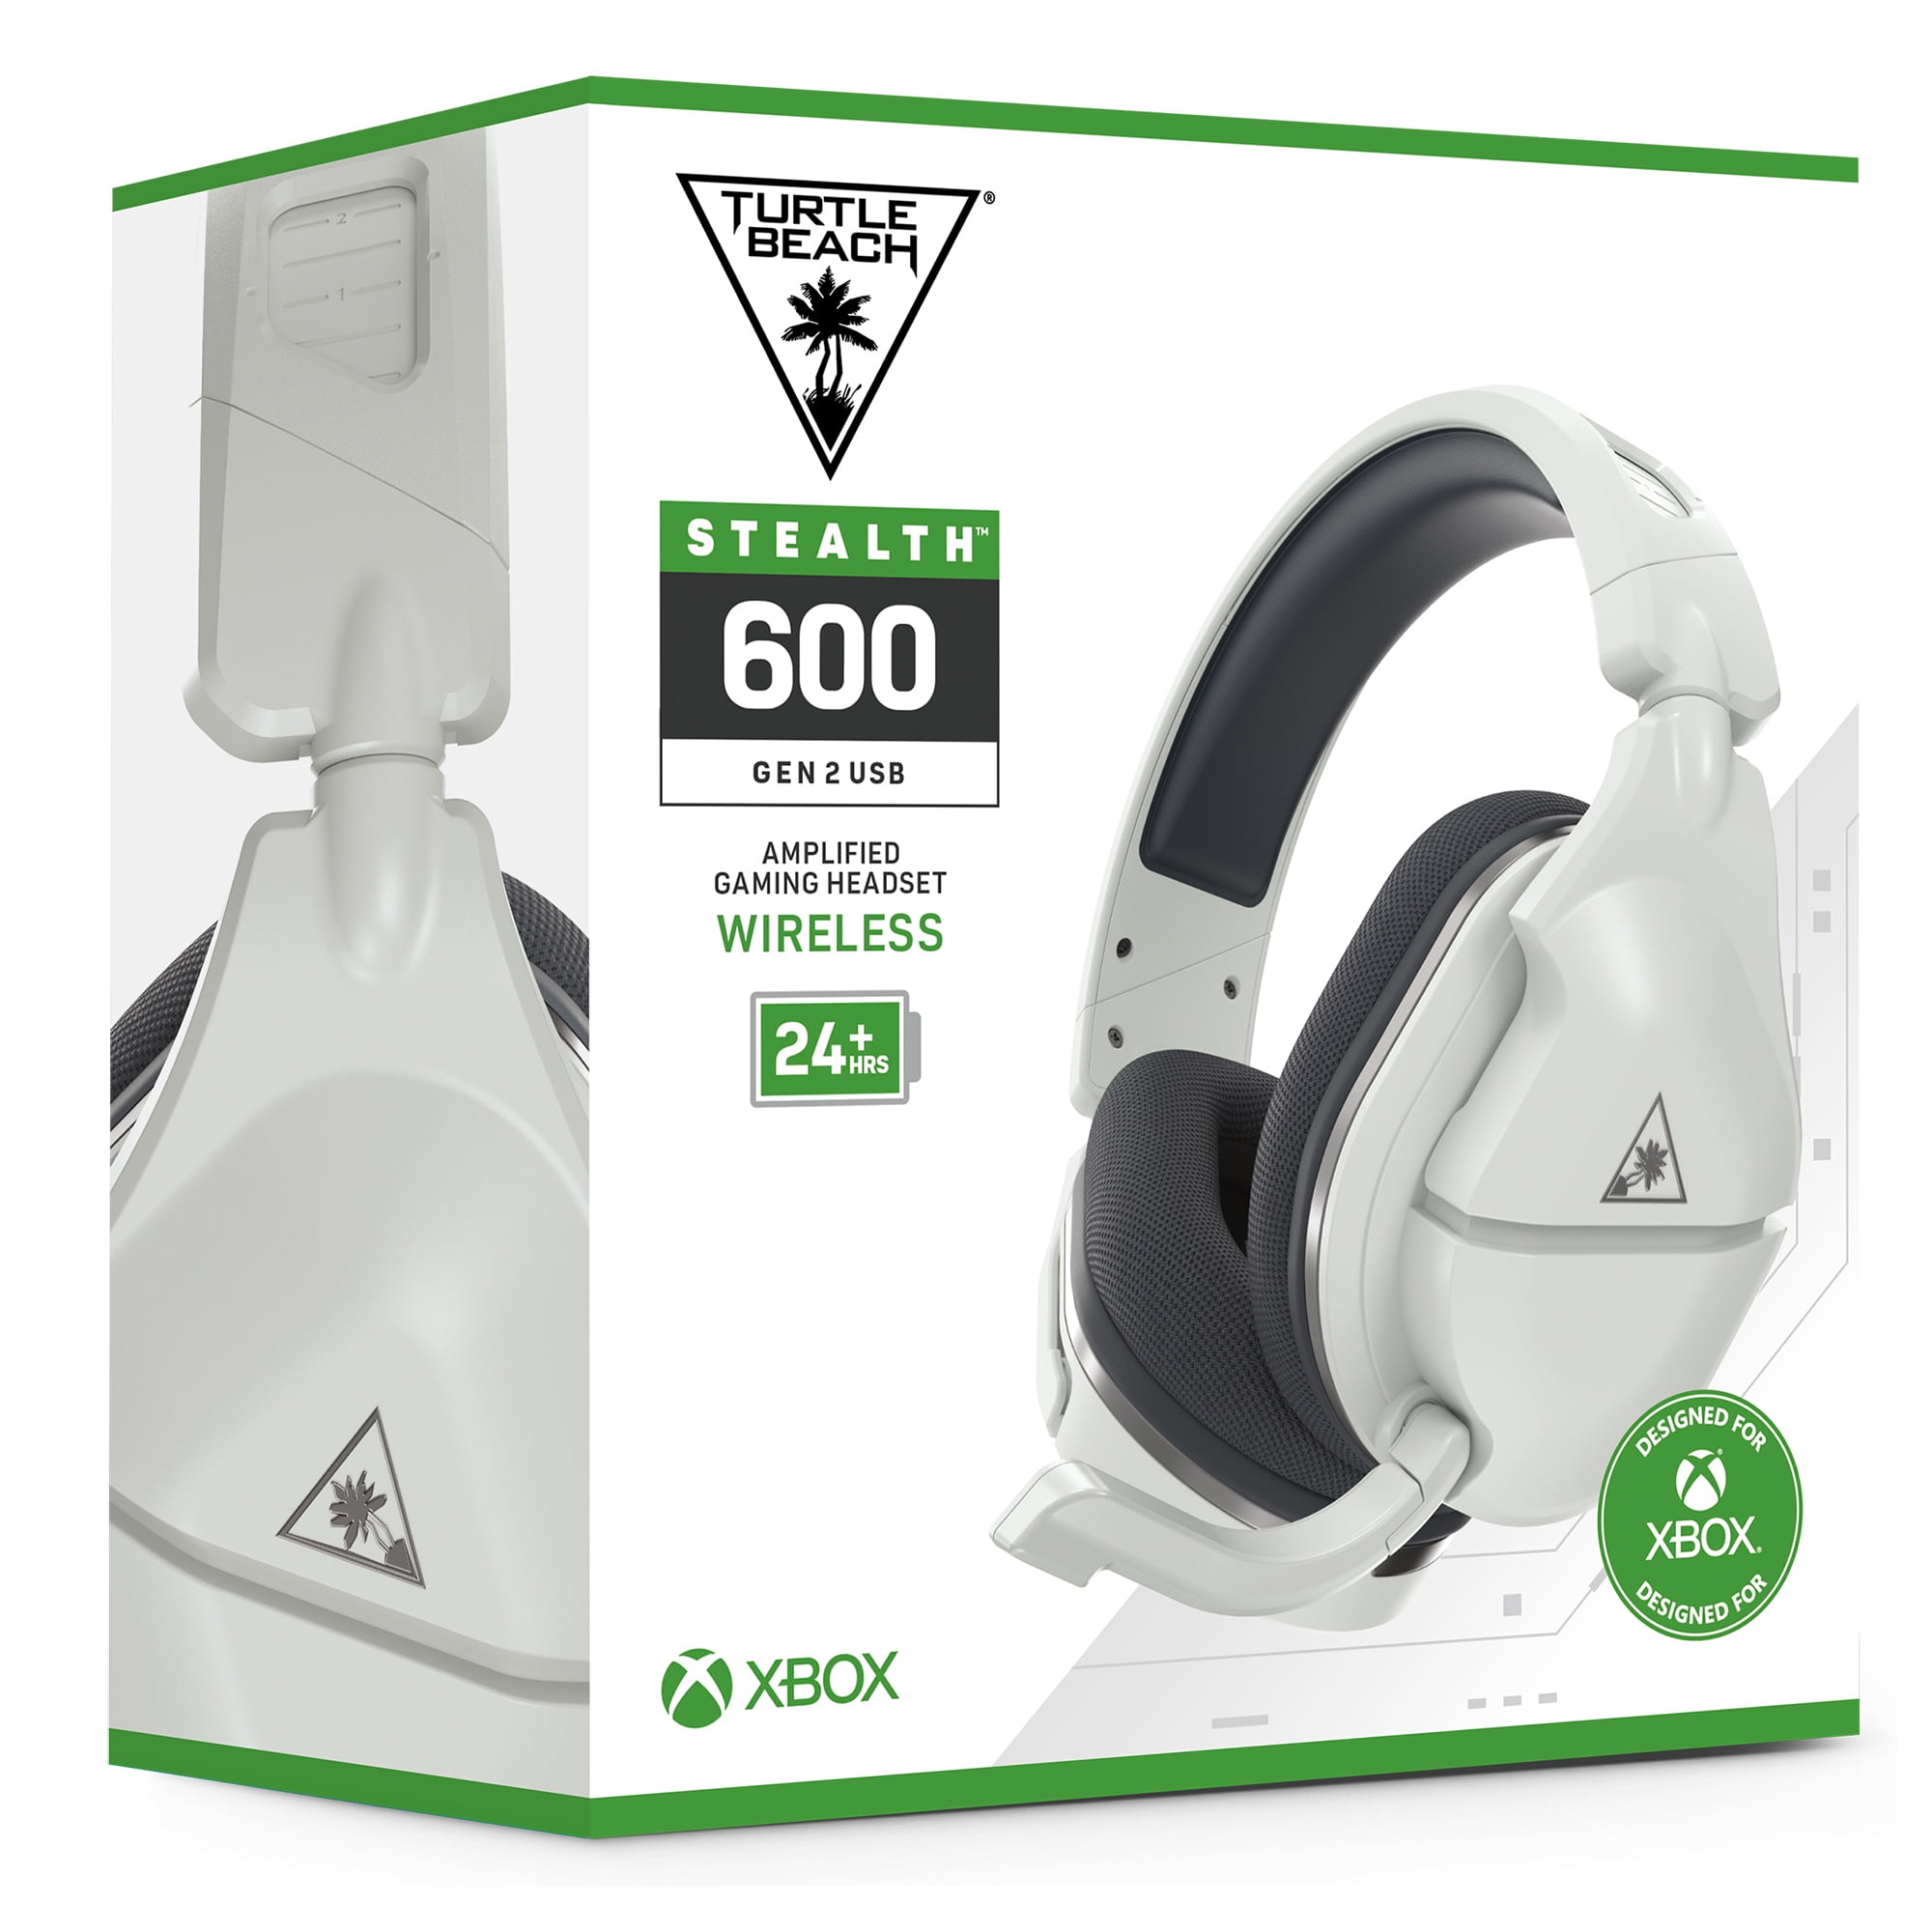 sjæl Minister rør Turtle Beach Stealth 600 Gen 2 USB Wireless Amplified Gaming Headset -  Licensed for Xbox Series X, Xbox Series S, & Xbox One - 24+ Hour Battery,  50mm Speakers, Flip-to-Mute Mic, Spatial